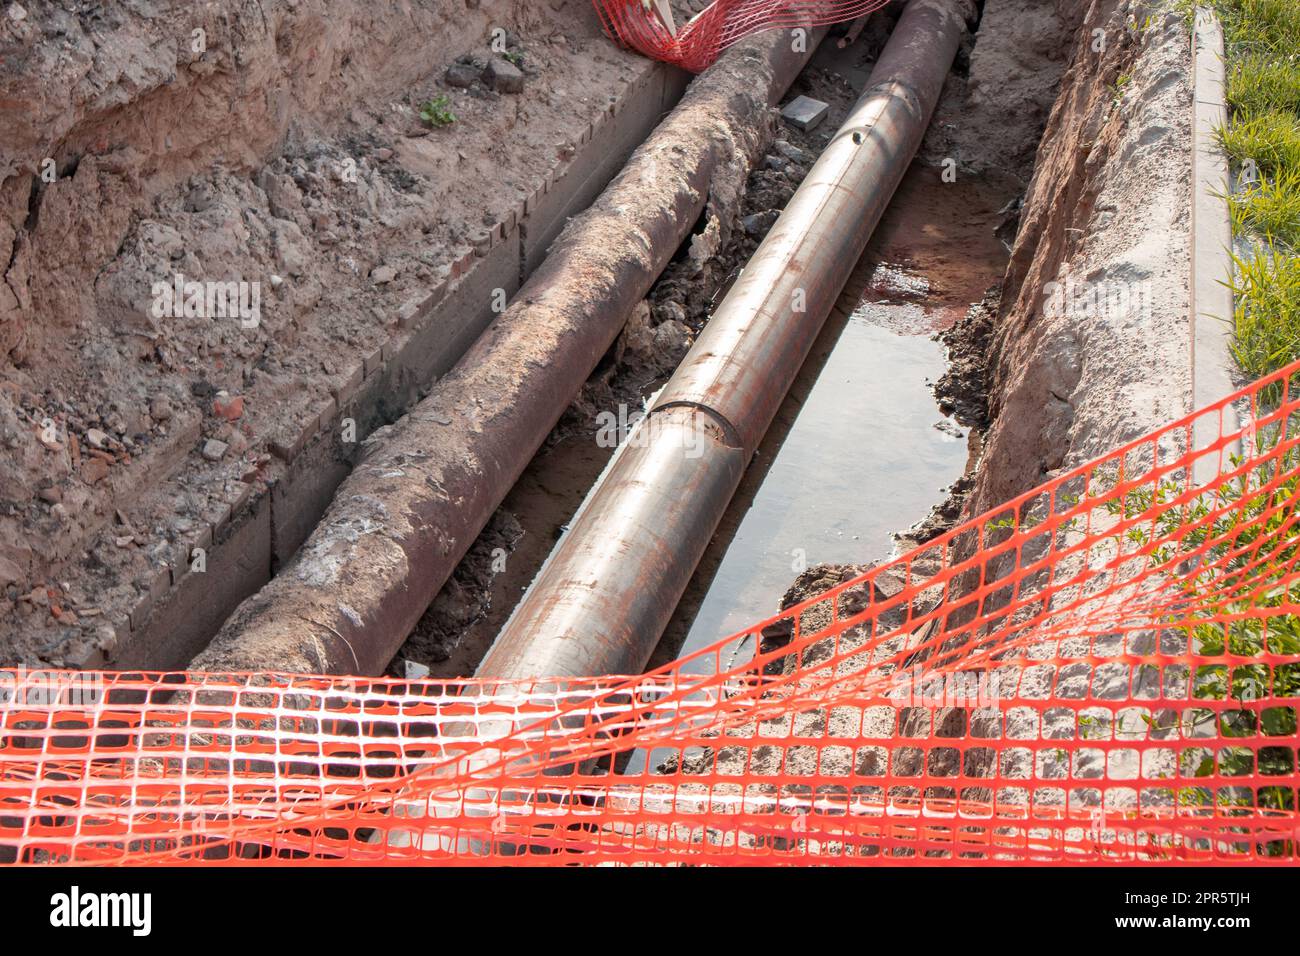 Repair of the heating plant system with the laying of new underground metal pipes in the trench. Reconstruction of the city heating system. Mesh fencing for work safety Stock Photo